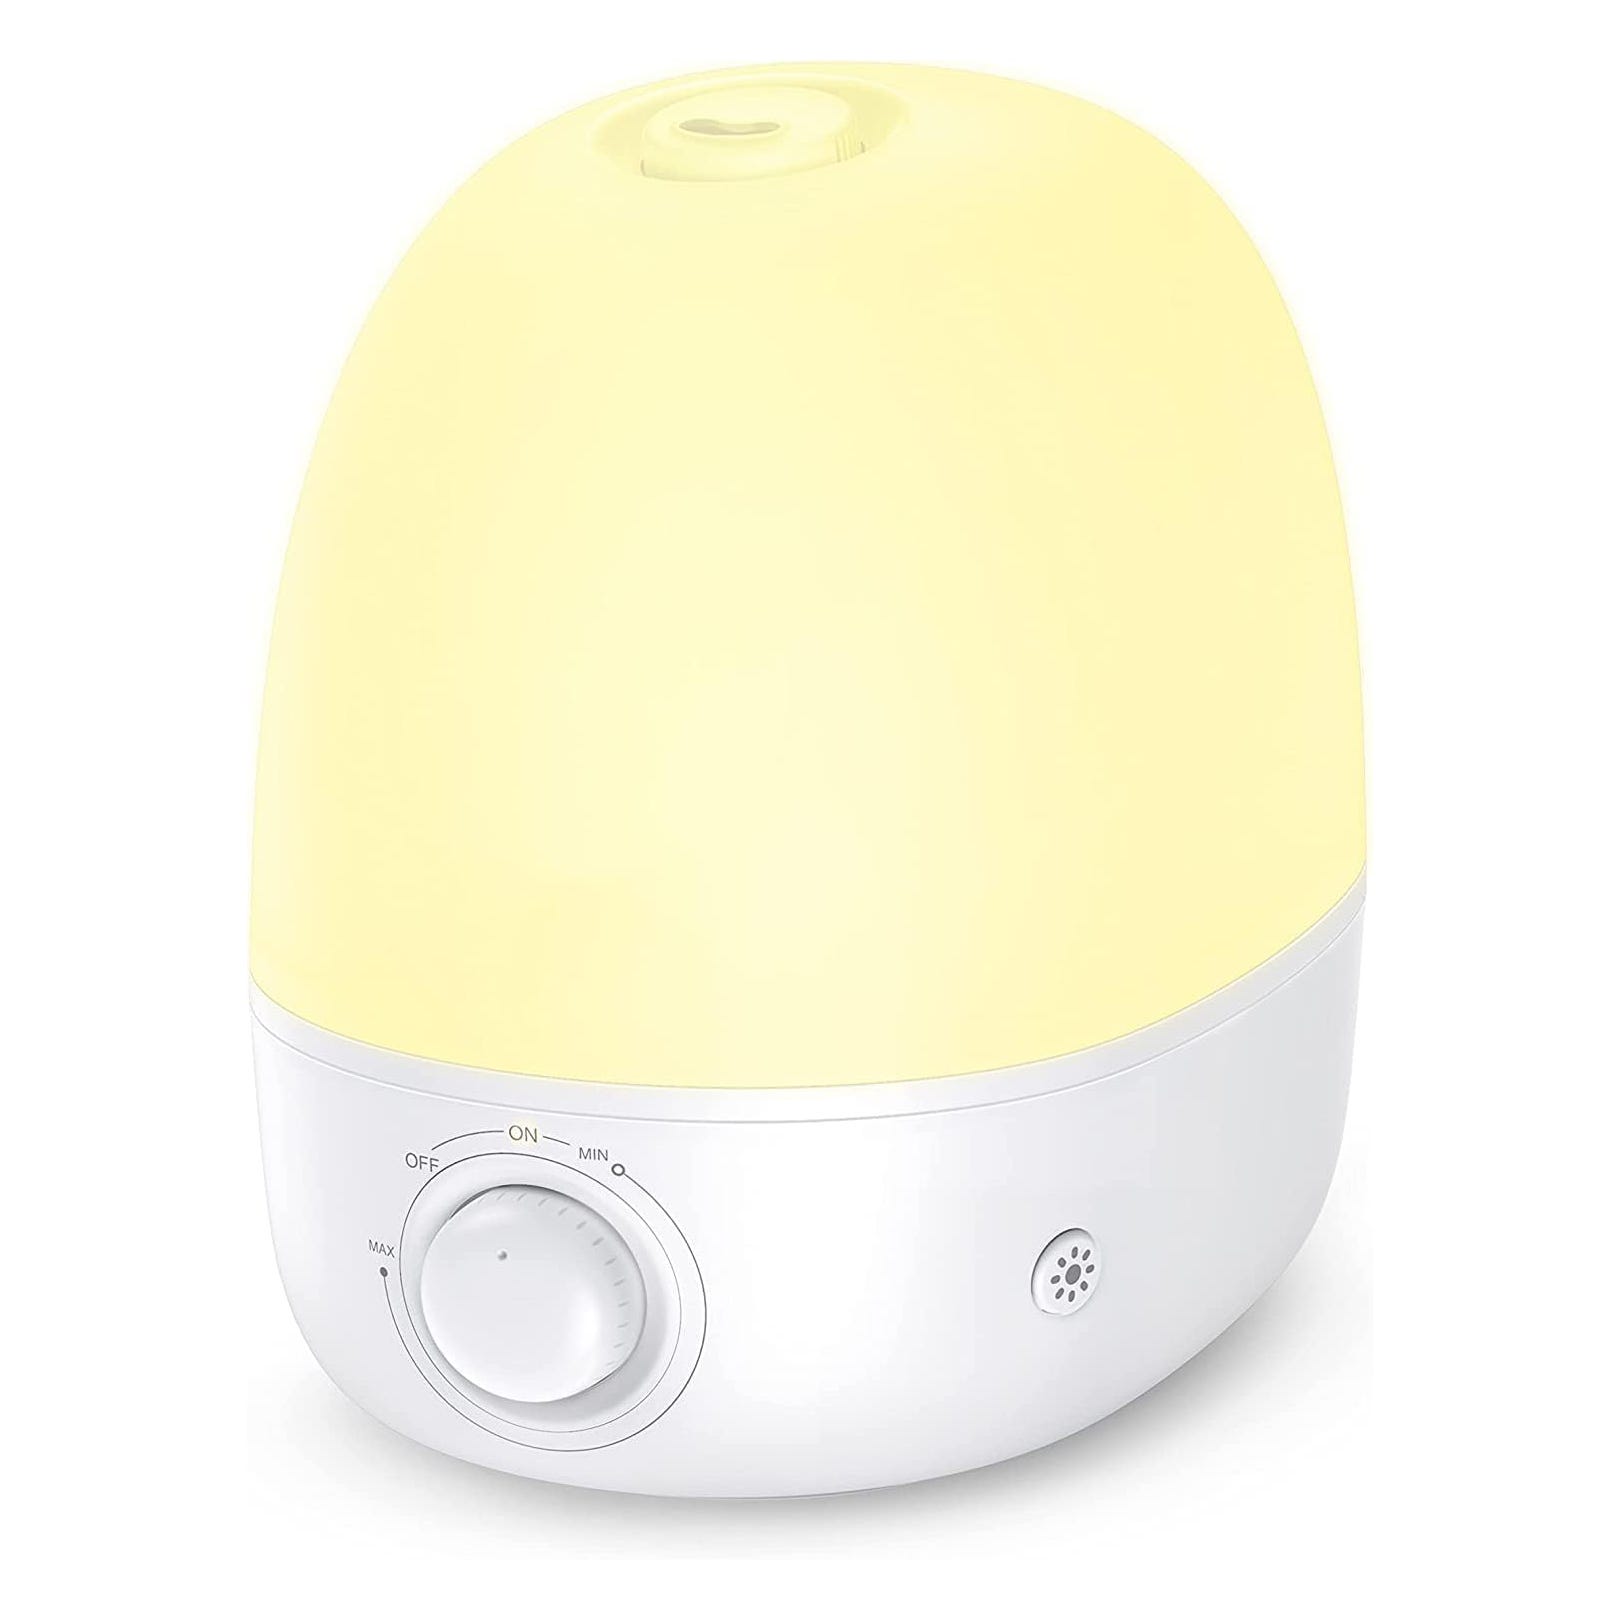 A white and yellow humidifier with a control dial on the front.